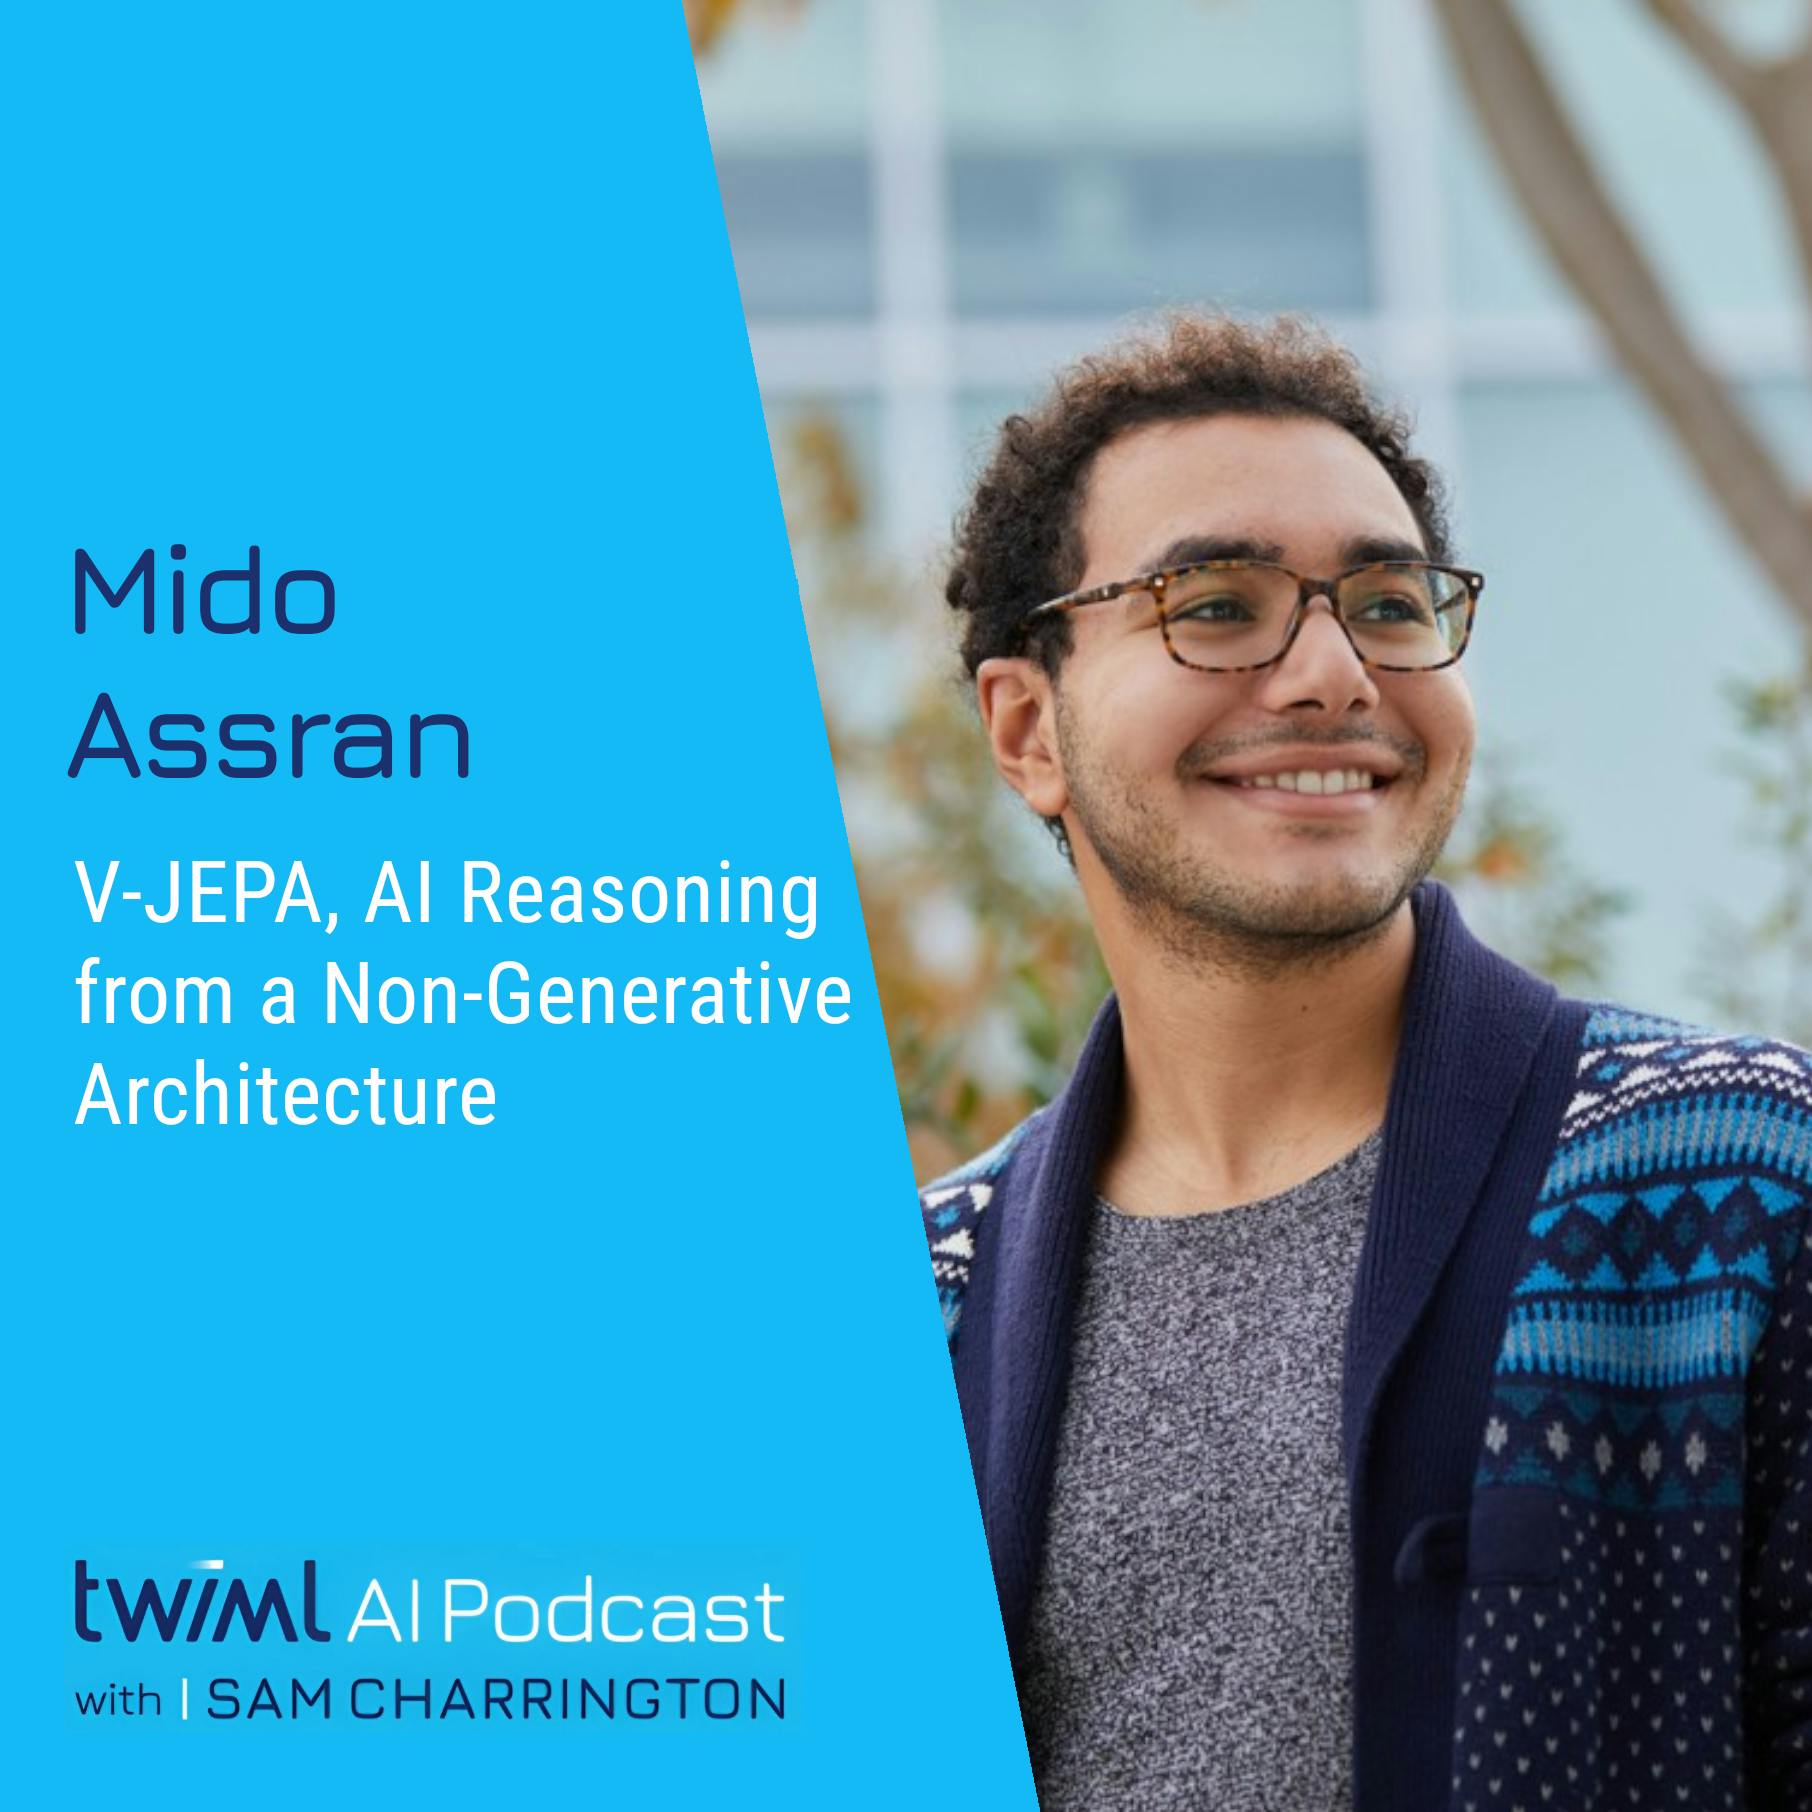 V-JEPA, AI Reasoning from a Non-Generative Architecture with Mido Assran - #677